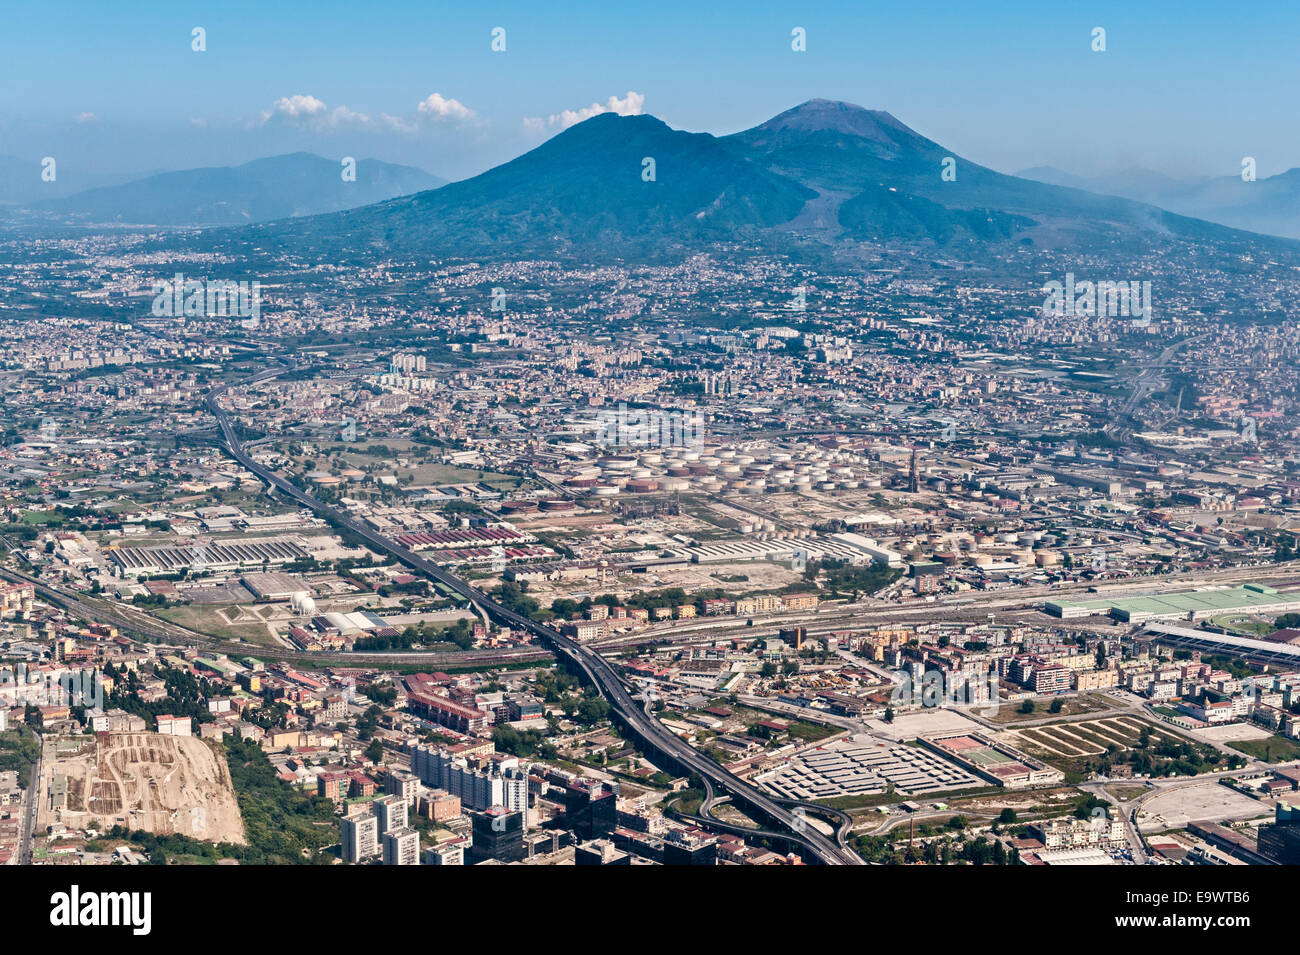 An aerial view of the volcano of Mount Vesuvius towering over the spreading suburbs of Naples, Campania, southern Italy Stock Photo